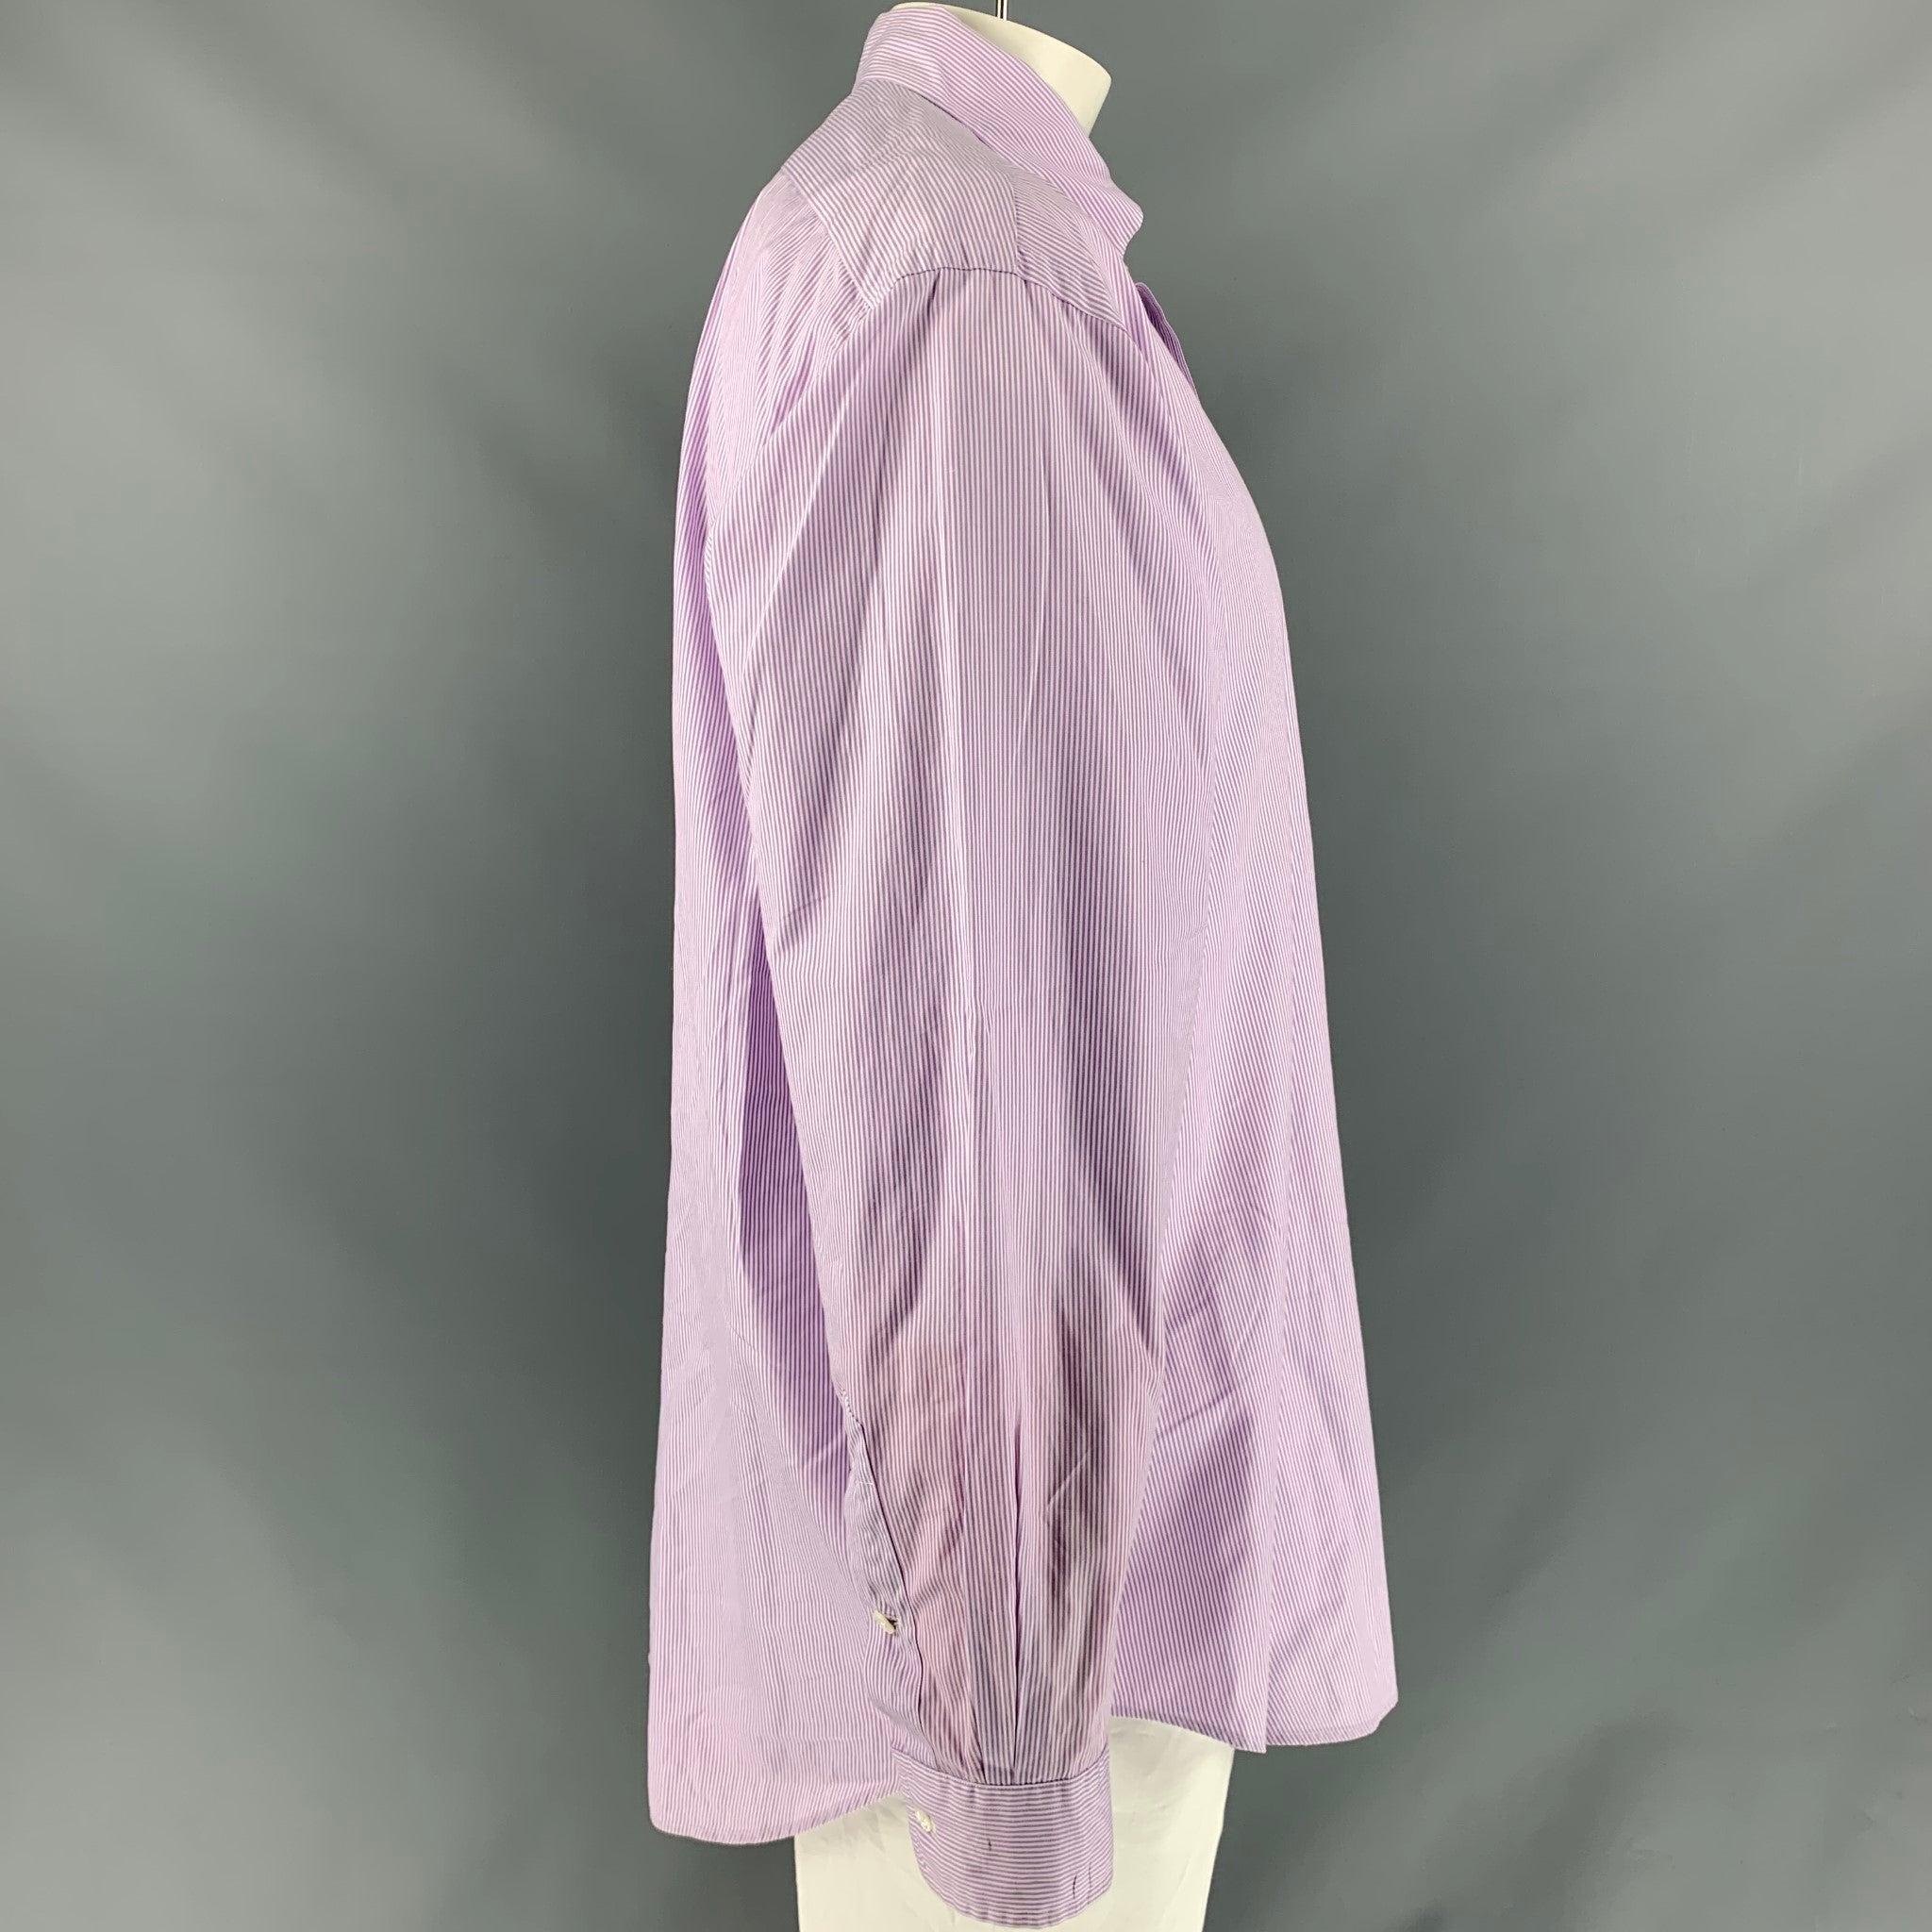 RALPH LAUREN 'Blake' long sleeve shirt comes in lavender stripped cotton featuring a button- down collar, patch pocket, buttoned closure and one button round cuff. Excellent Pre-Owned Condition. 

Marked:   XL 

Measurements: 
 
Shoulder: 23 inches